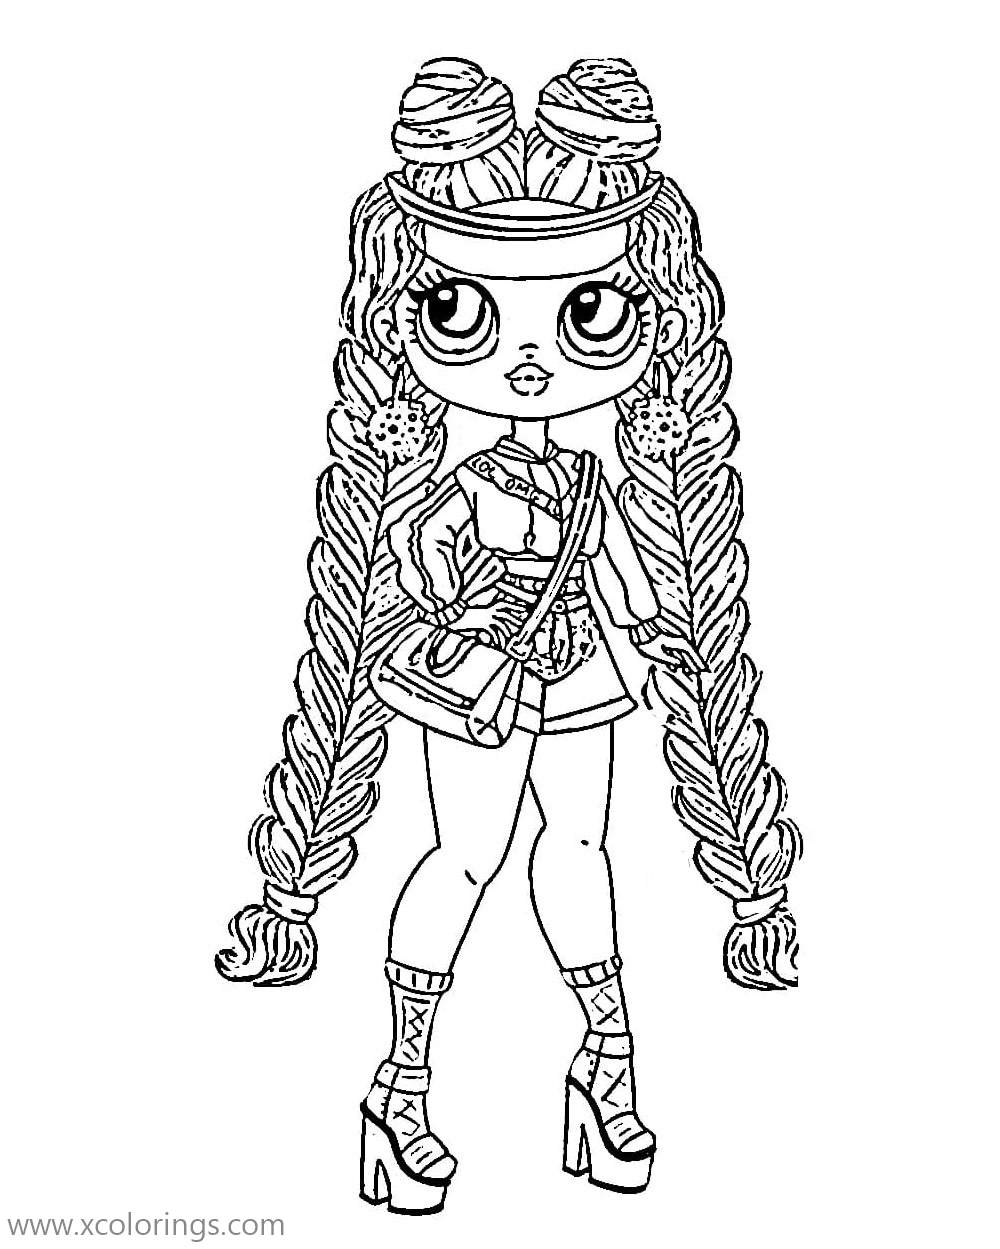 Older sister from LOL OMG Doll Coloring Pages XColorings com